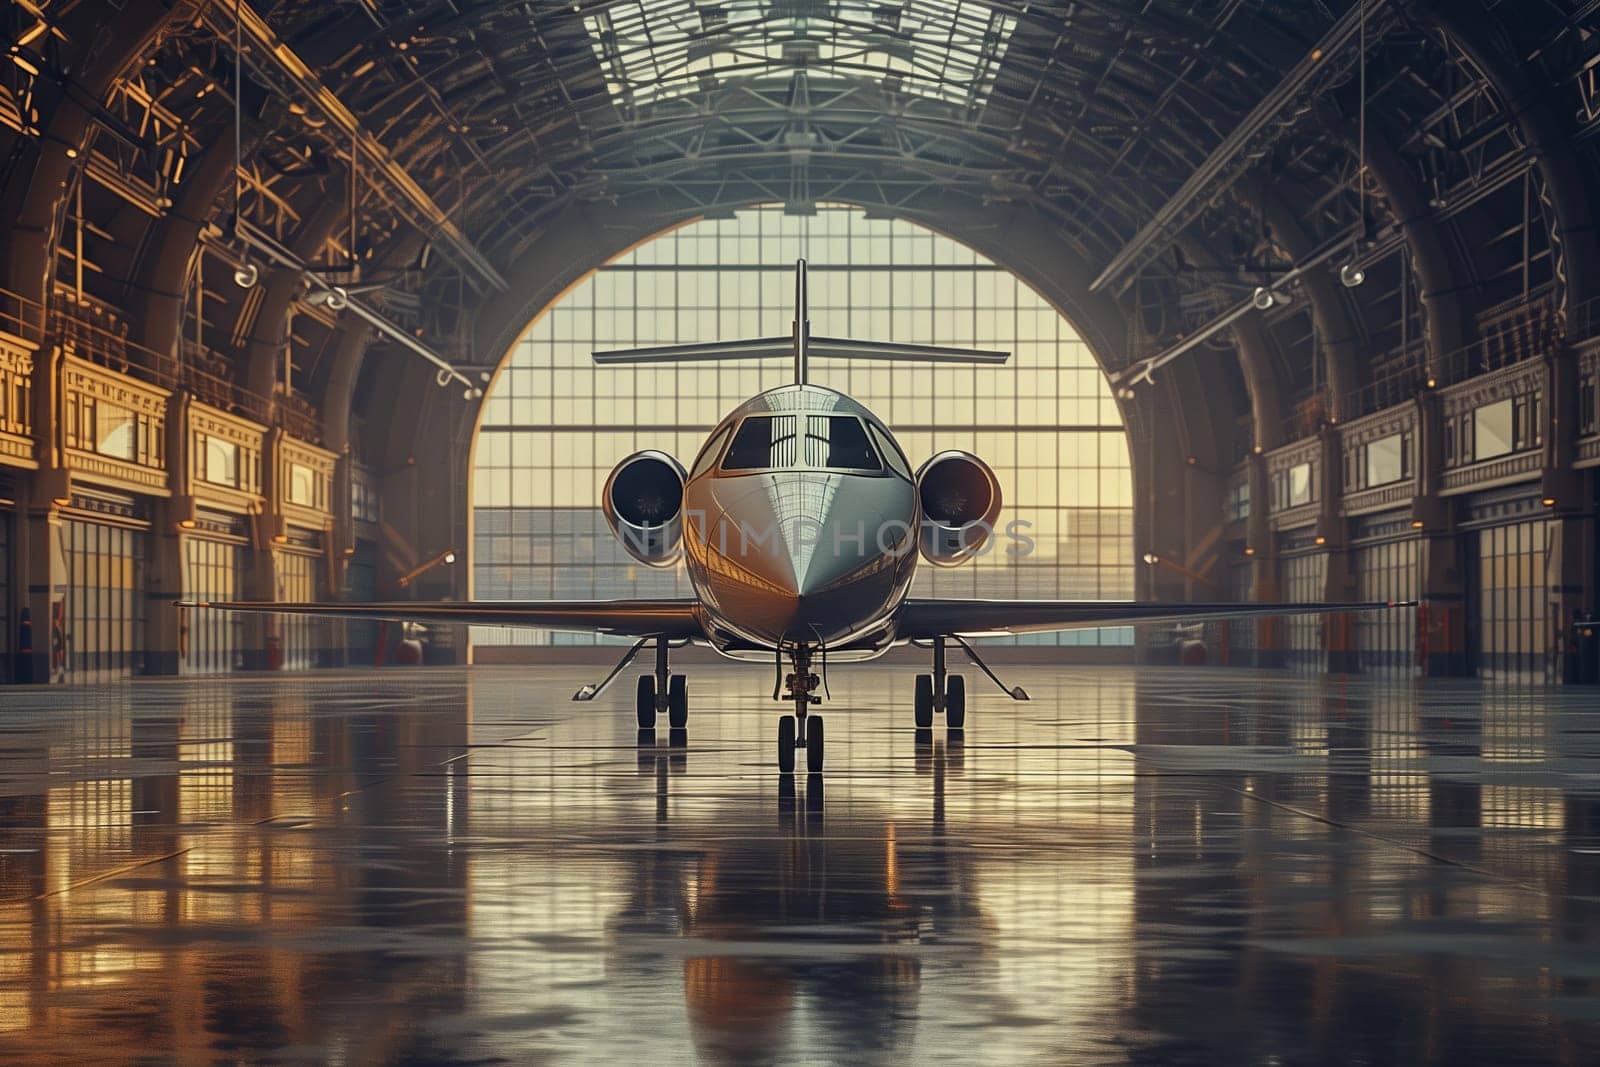 An upscale private aircraft sits in a spacious hangar. The sleek, symmetrical design showcases a mix of composite materials and metal fixtures on the flooring